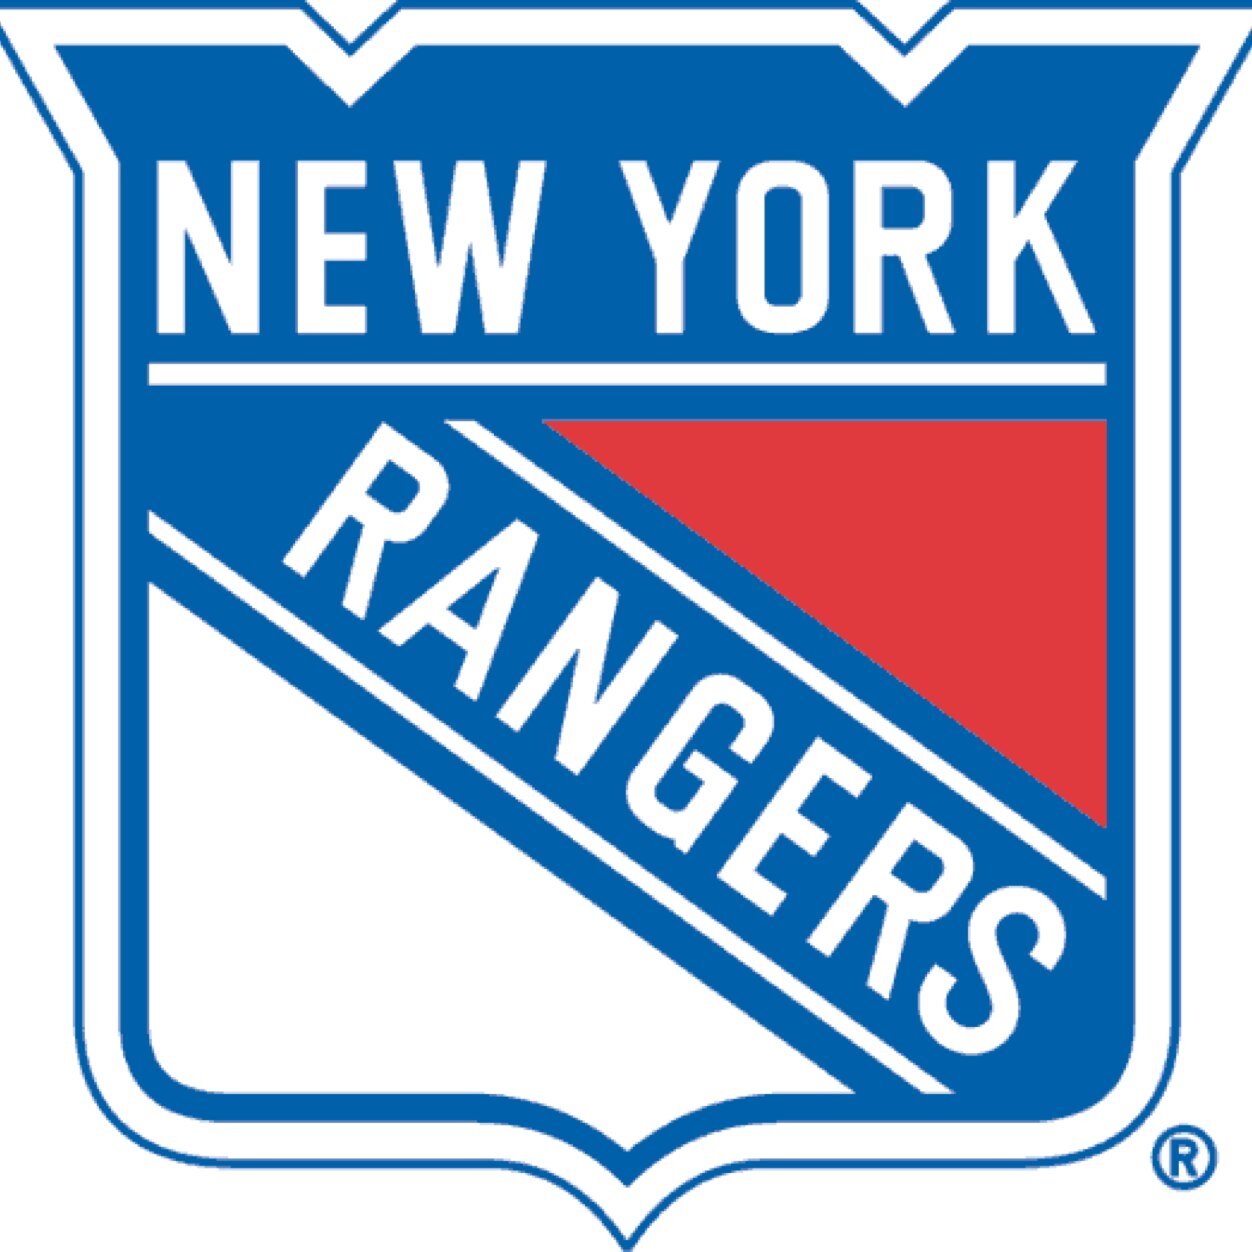 Listen to Rangers Daily with Dave Maloney every Thursday at 1:05pm EST on The Red Line! @htwredline @htwradio @hockeythisweek